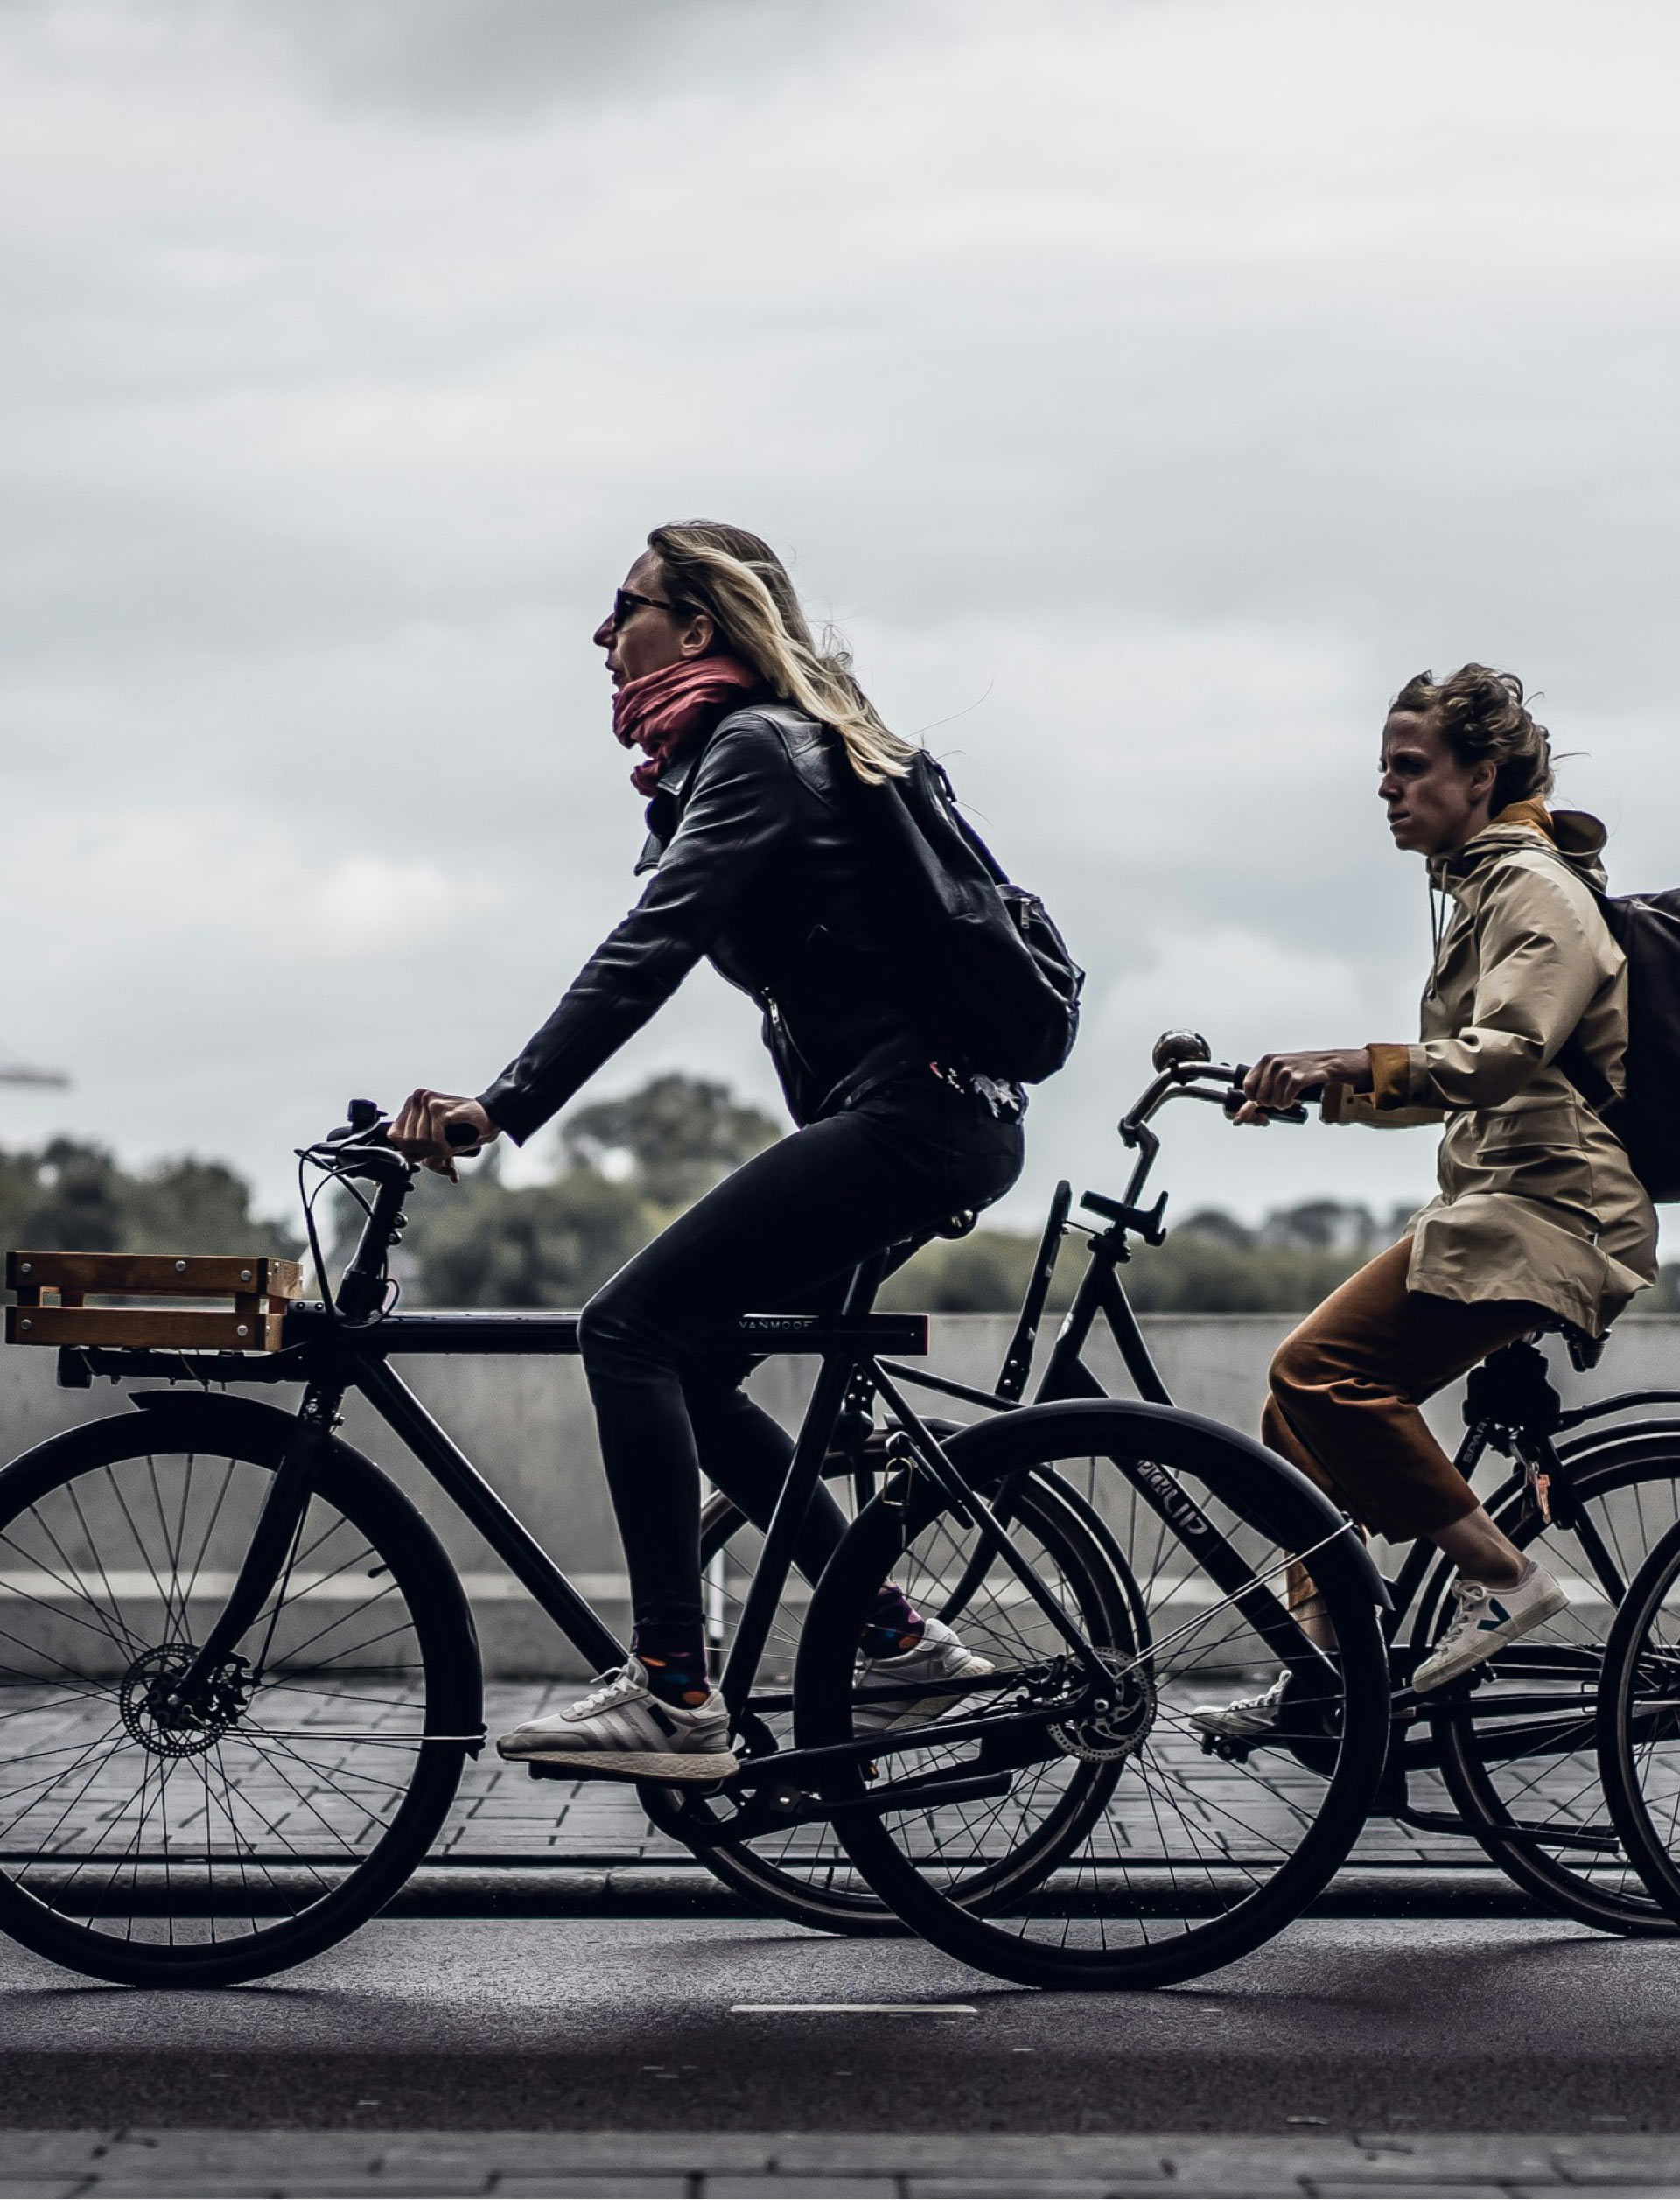 Two women riding bicycles on a city street.